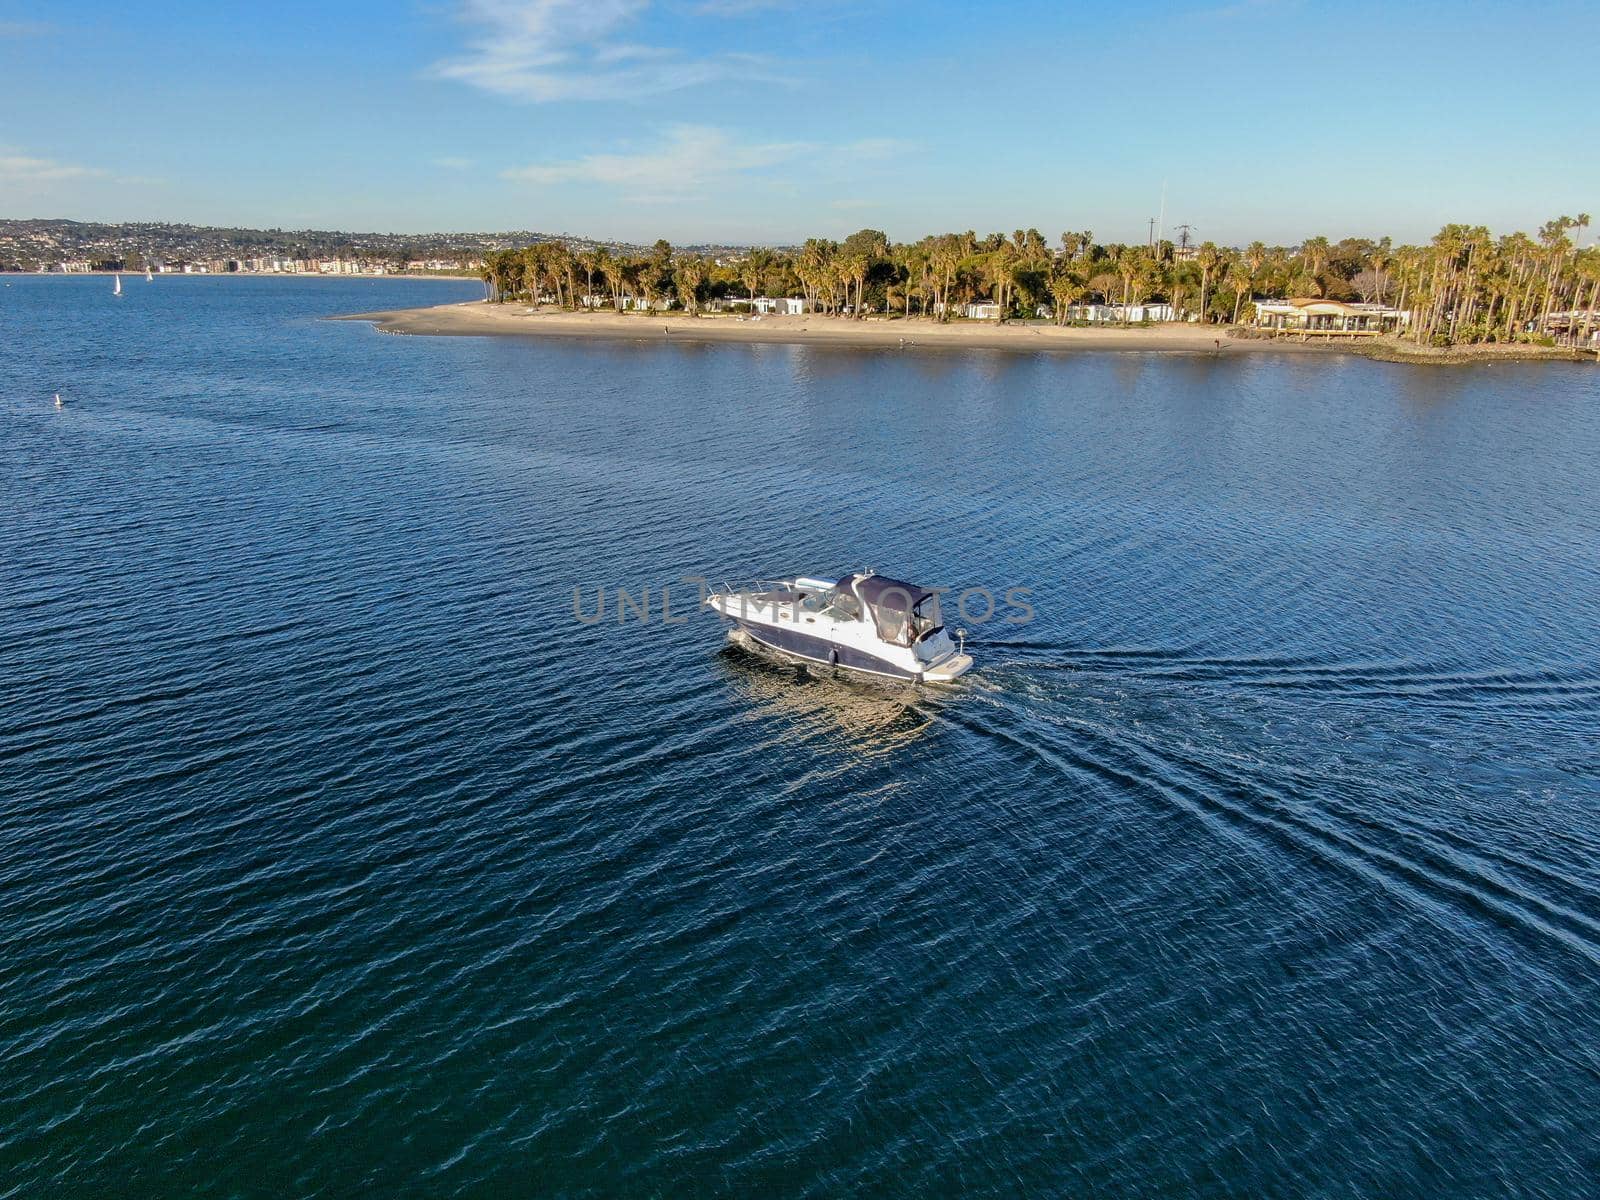 Aerial view of small speed boat in the Mission Bay of San Diego, California, USA. Small power boat yachts cruising on a calm water in the bay. March 22nd, 2020